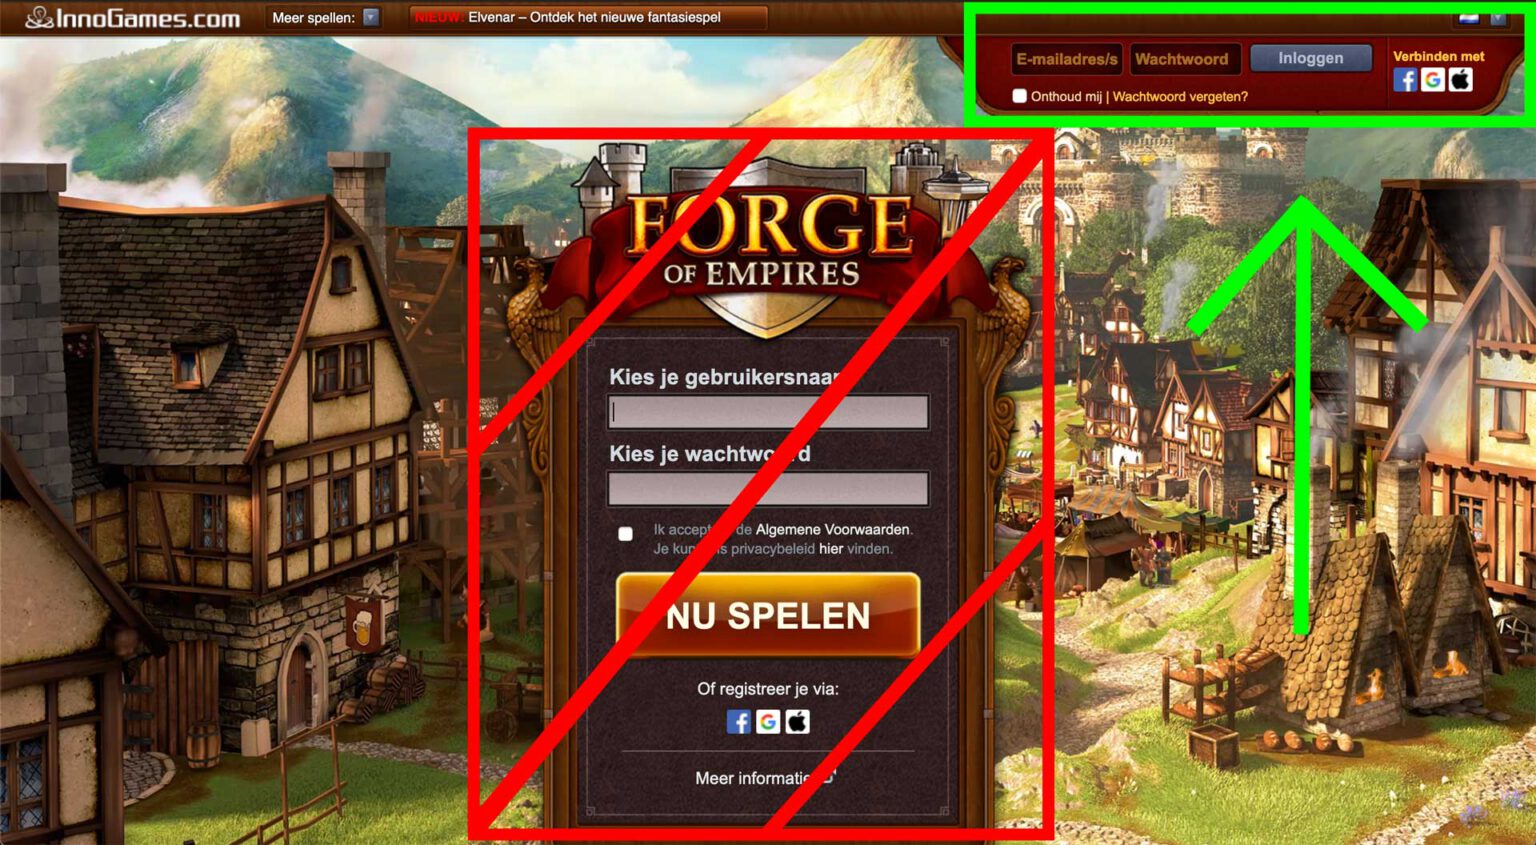 forge of empires login new city